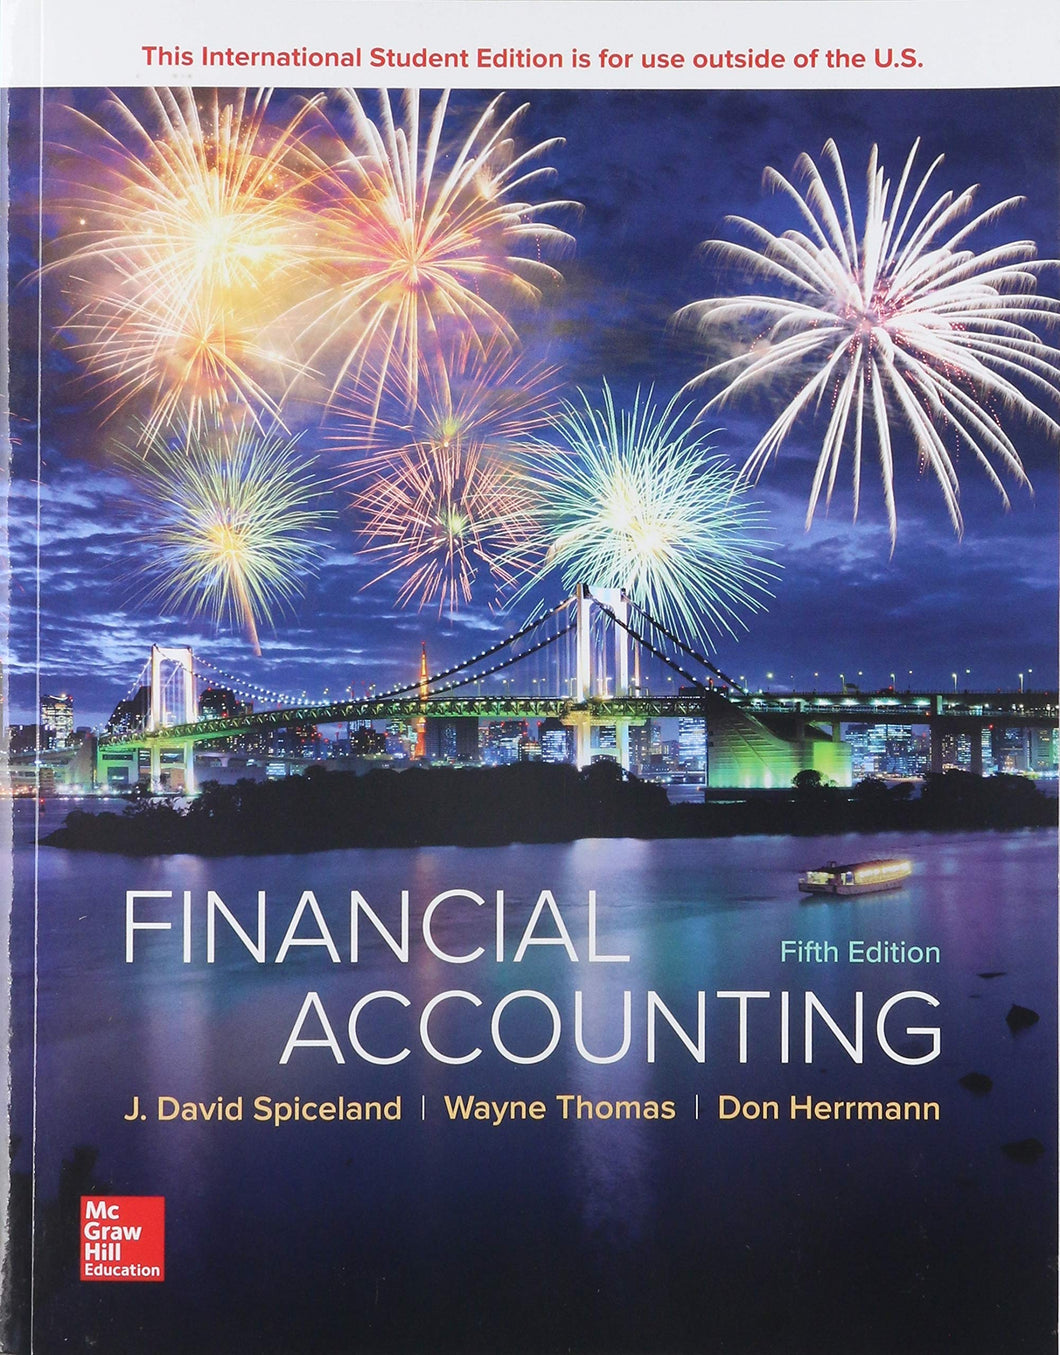 Financial Accounting [Paperback] 5e by David Spiceland